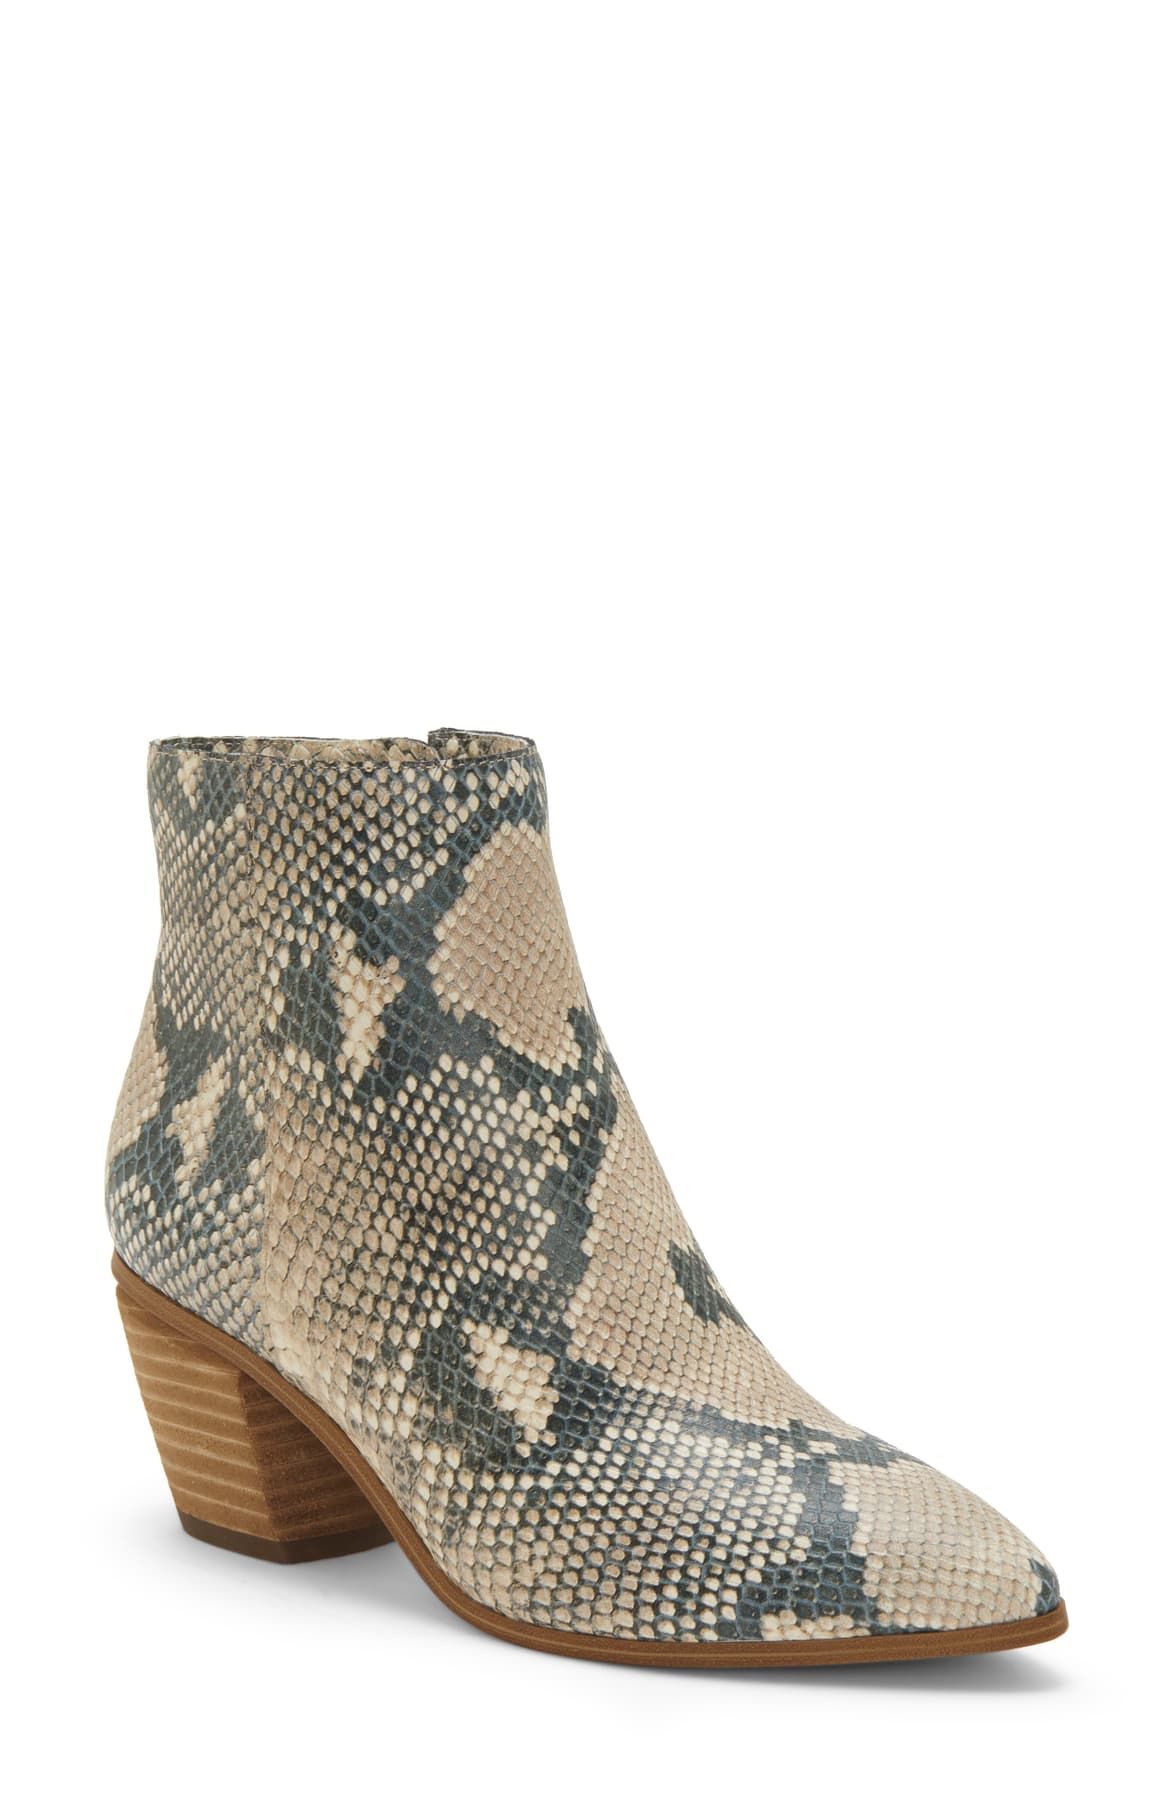 Vince Camuto Grasem Beige Snake Pointed Toe Western Boot Ankle Bootie ...